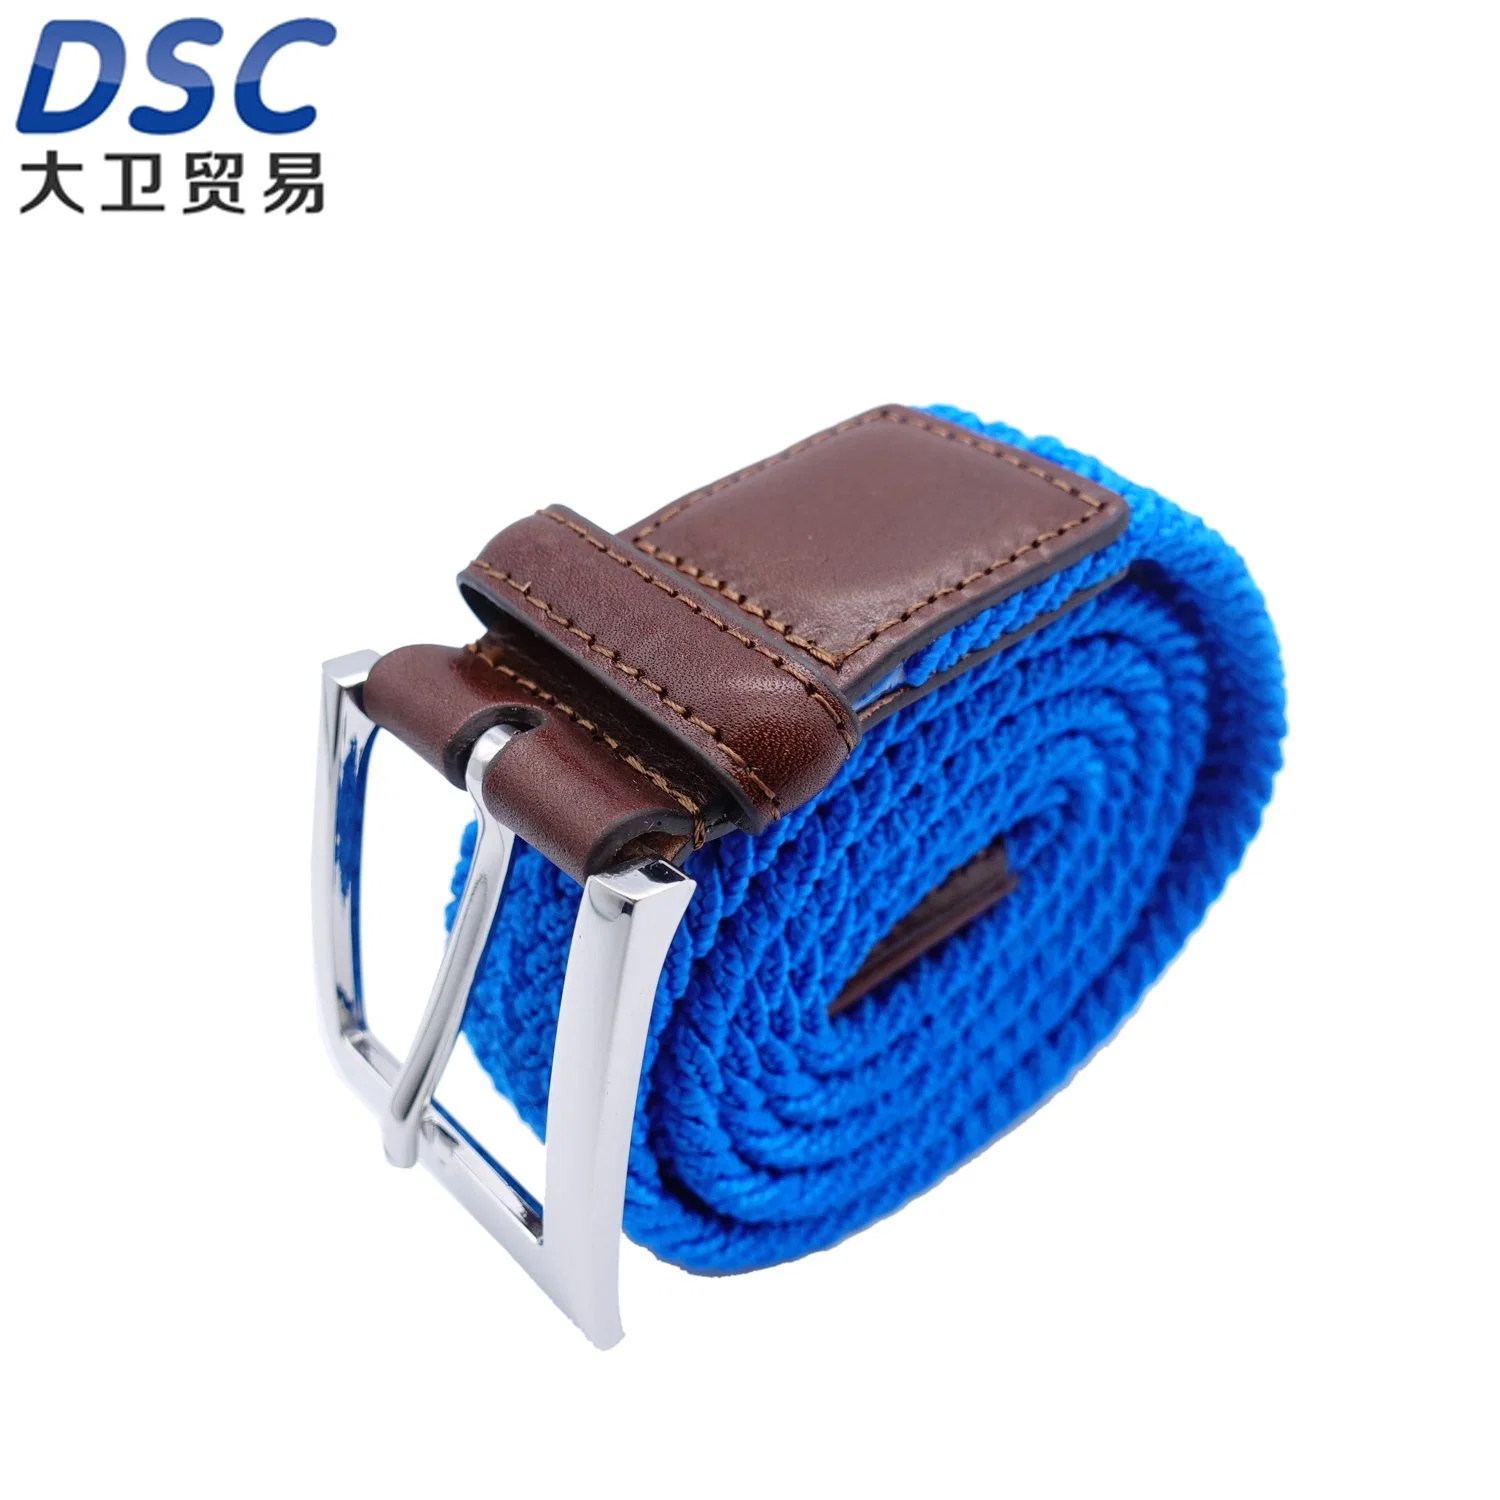 Fashion Elastic Braided Belt Woven Belt with Metal Buckle for Men and Women